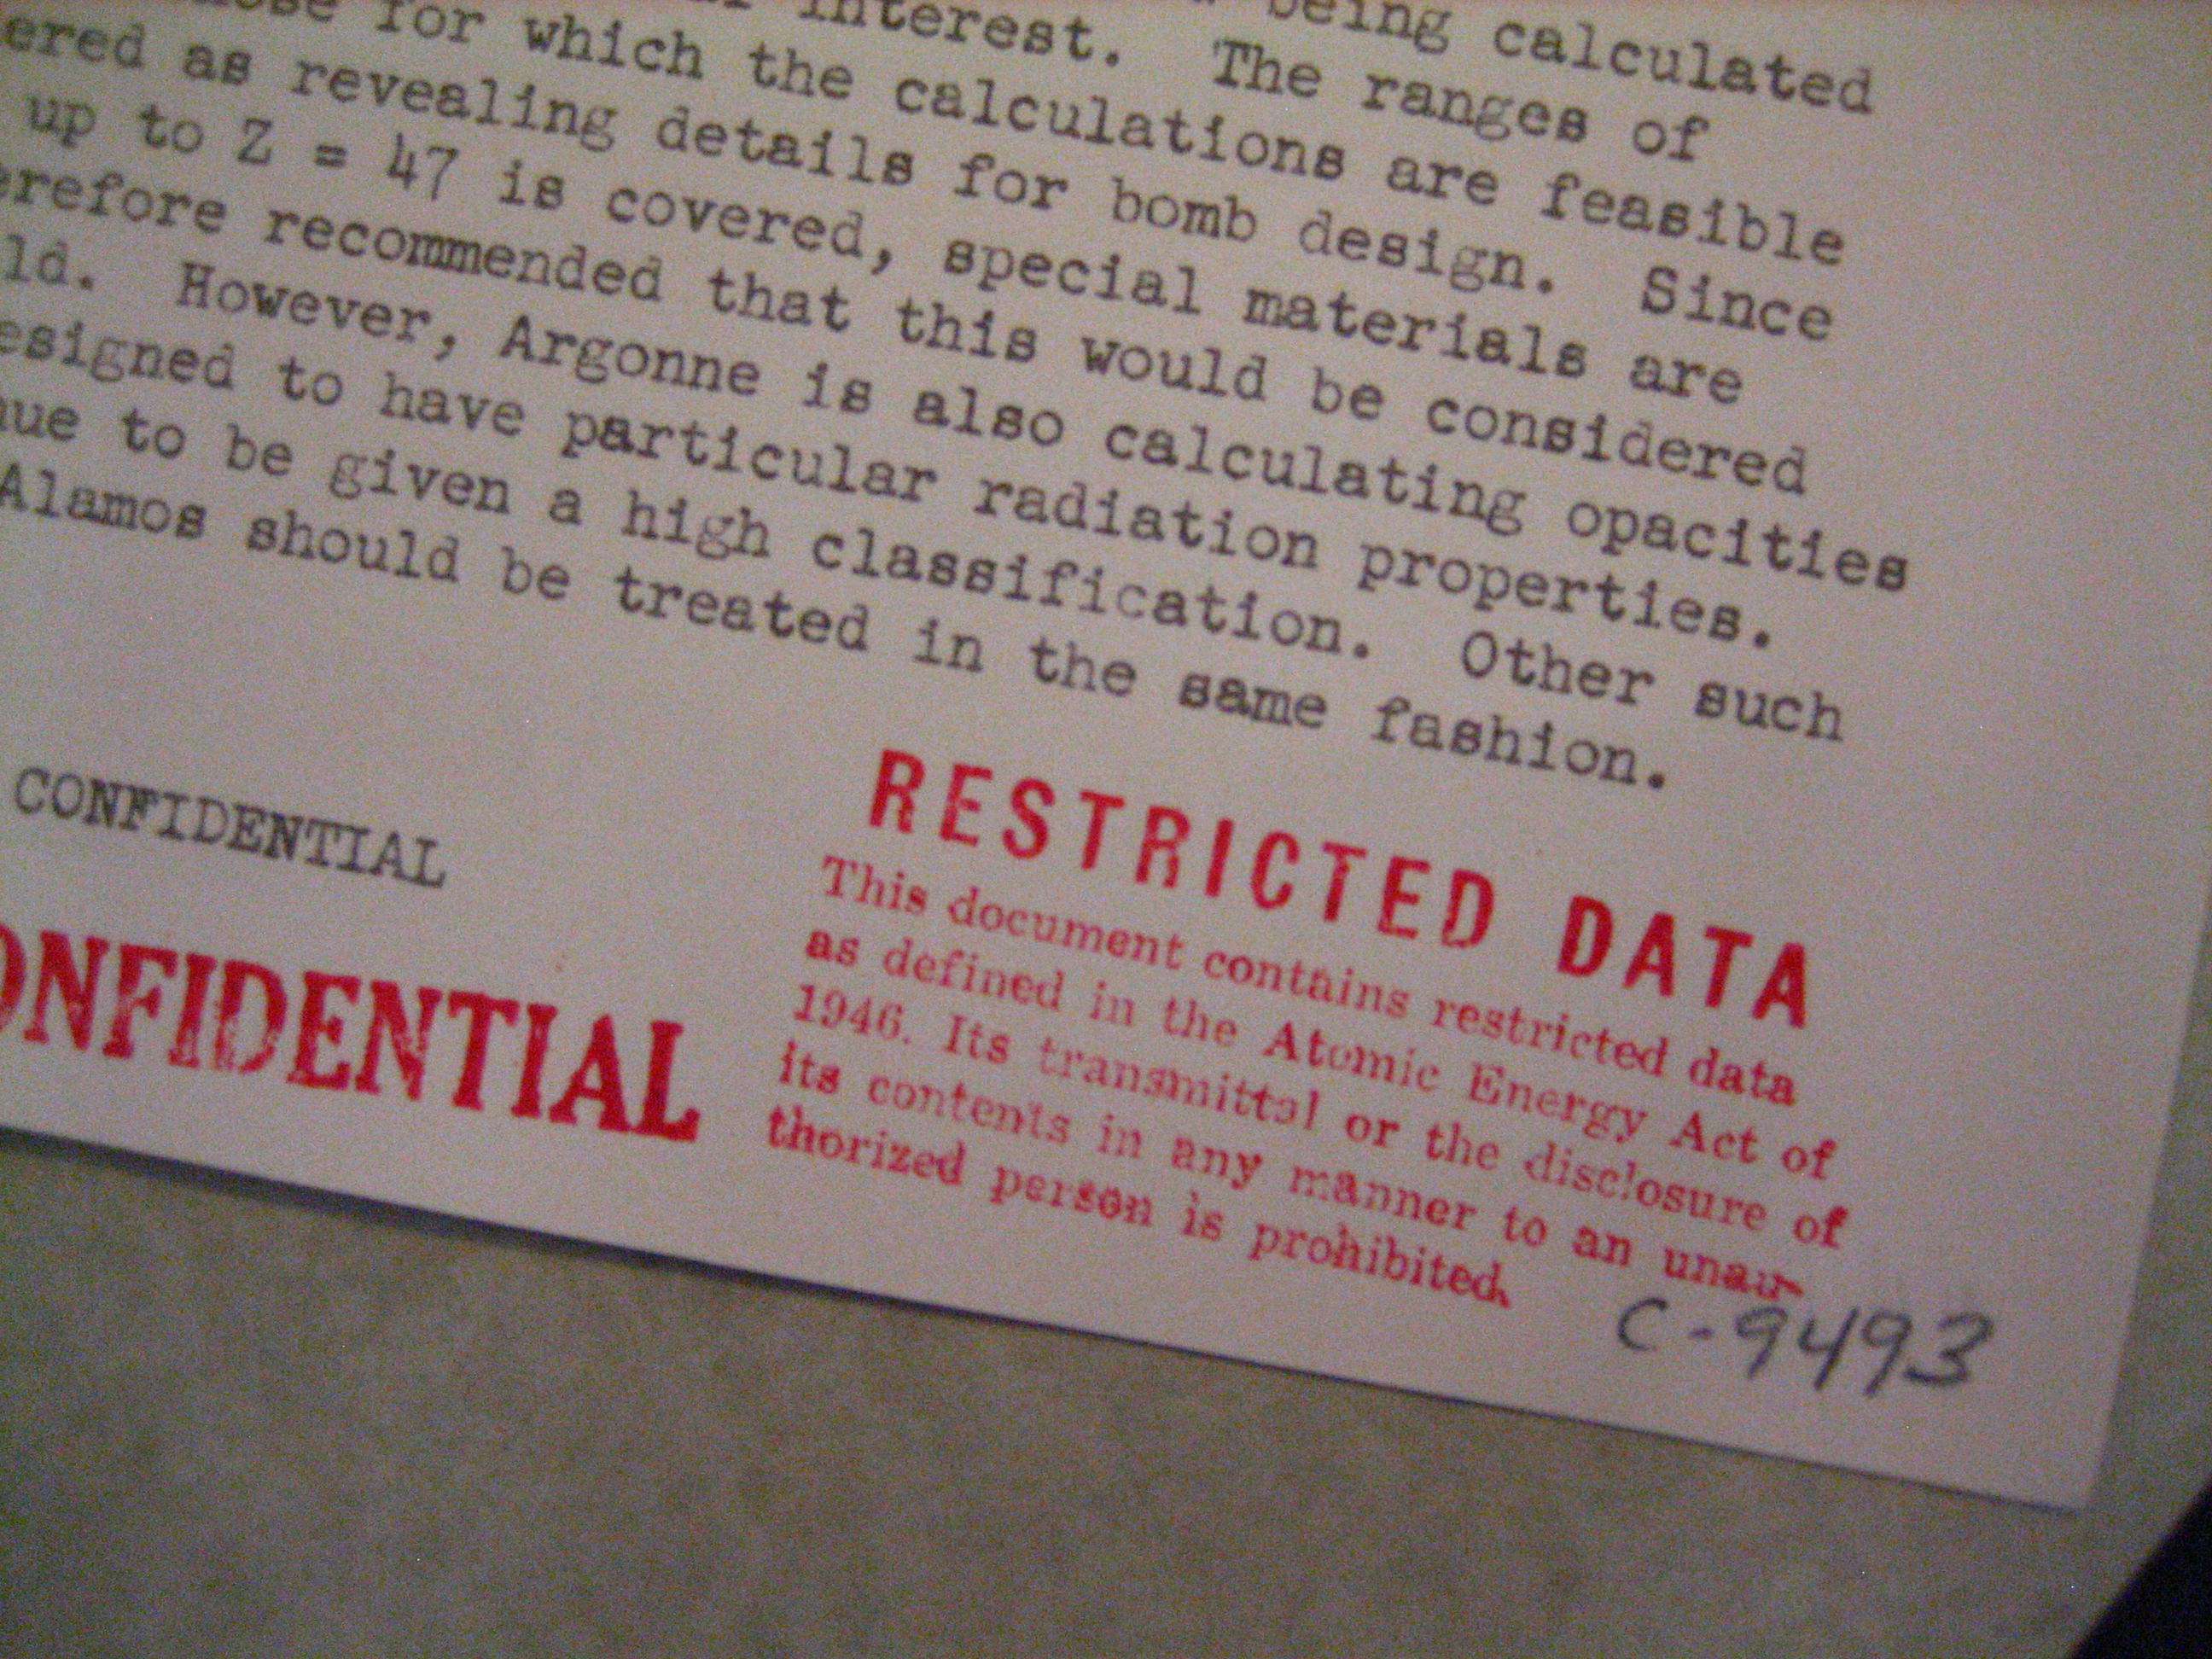 Restricted data